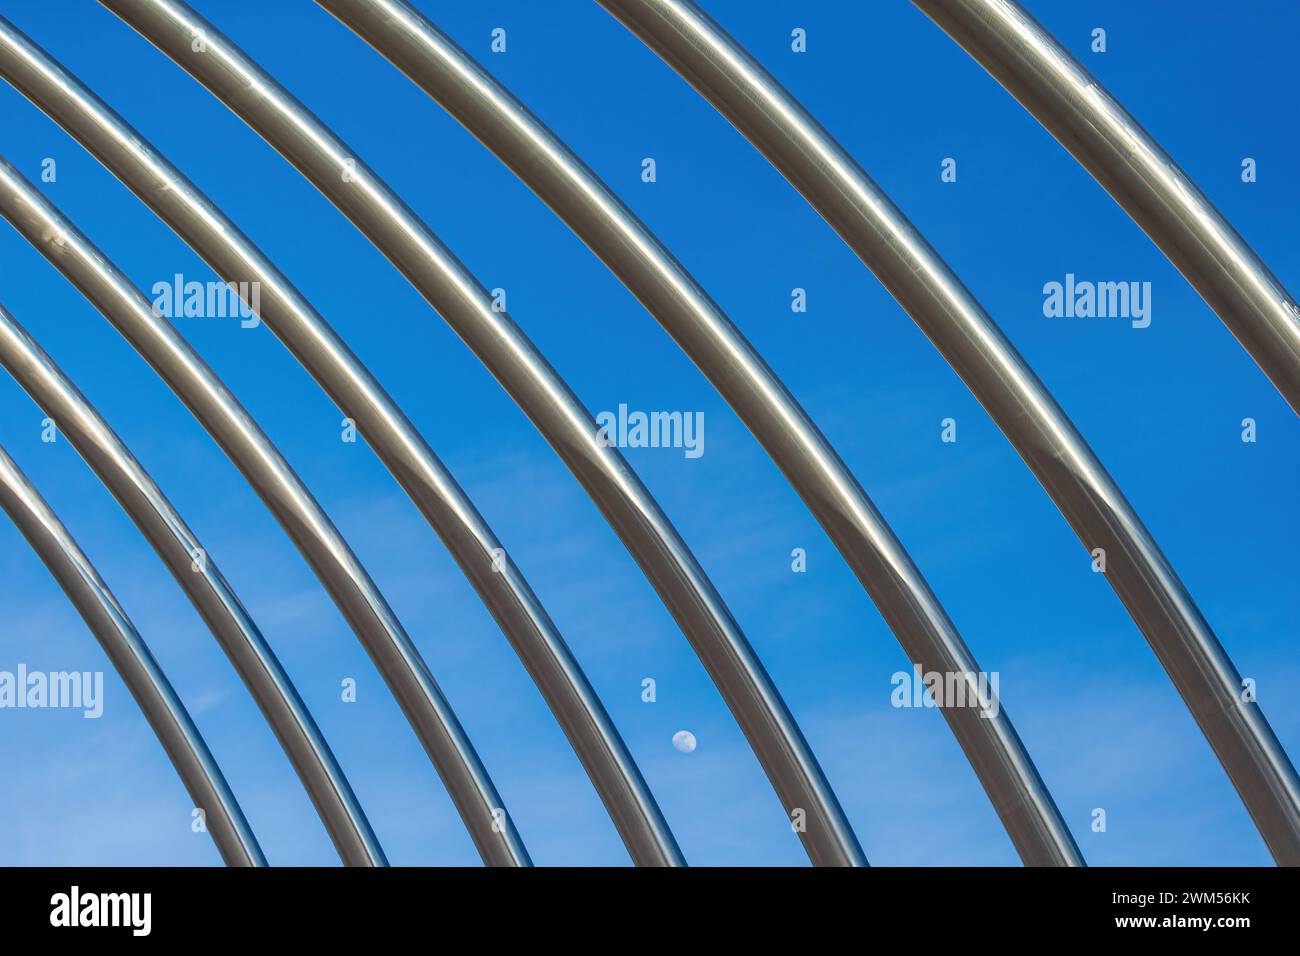 Abstract Metal Pipes and Tubes Sculpture Madrid, Spain Stock Photo